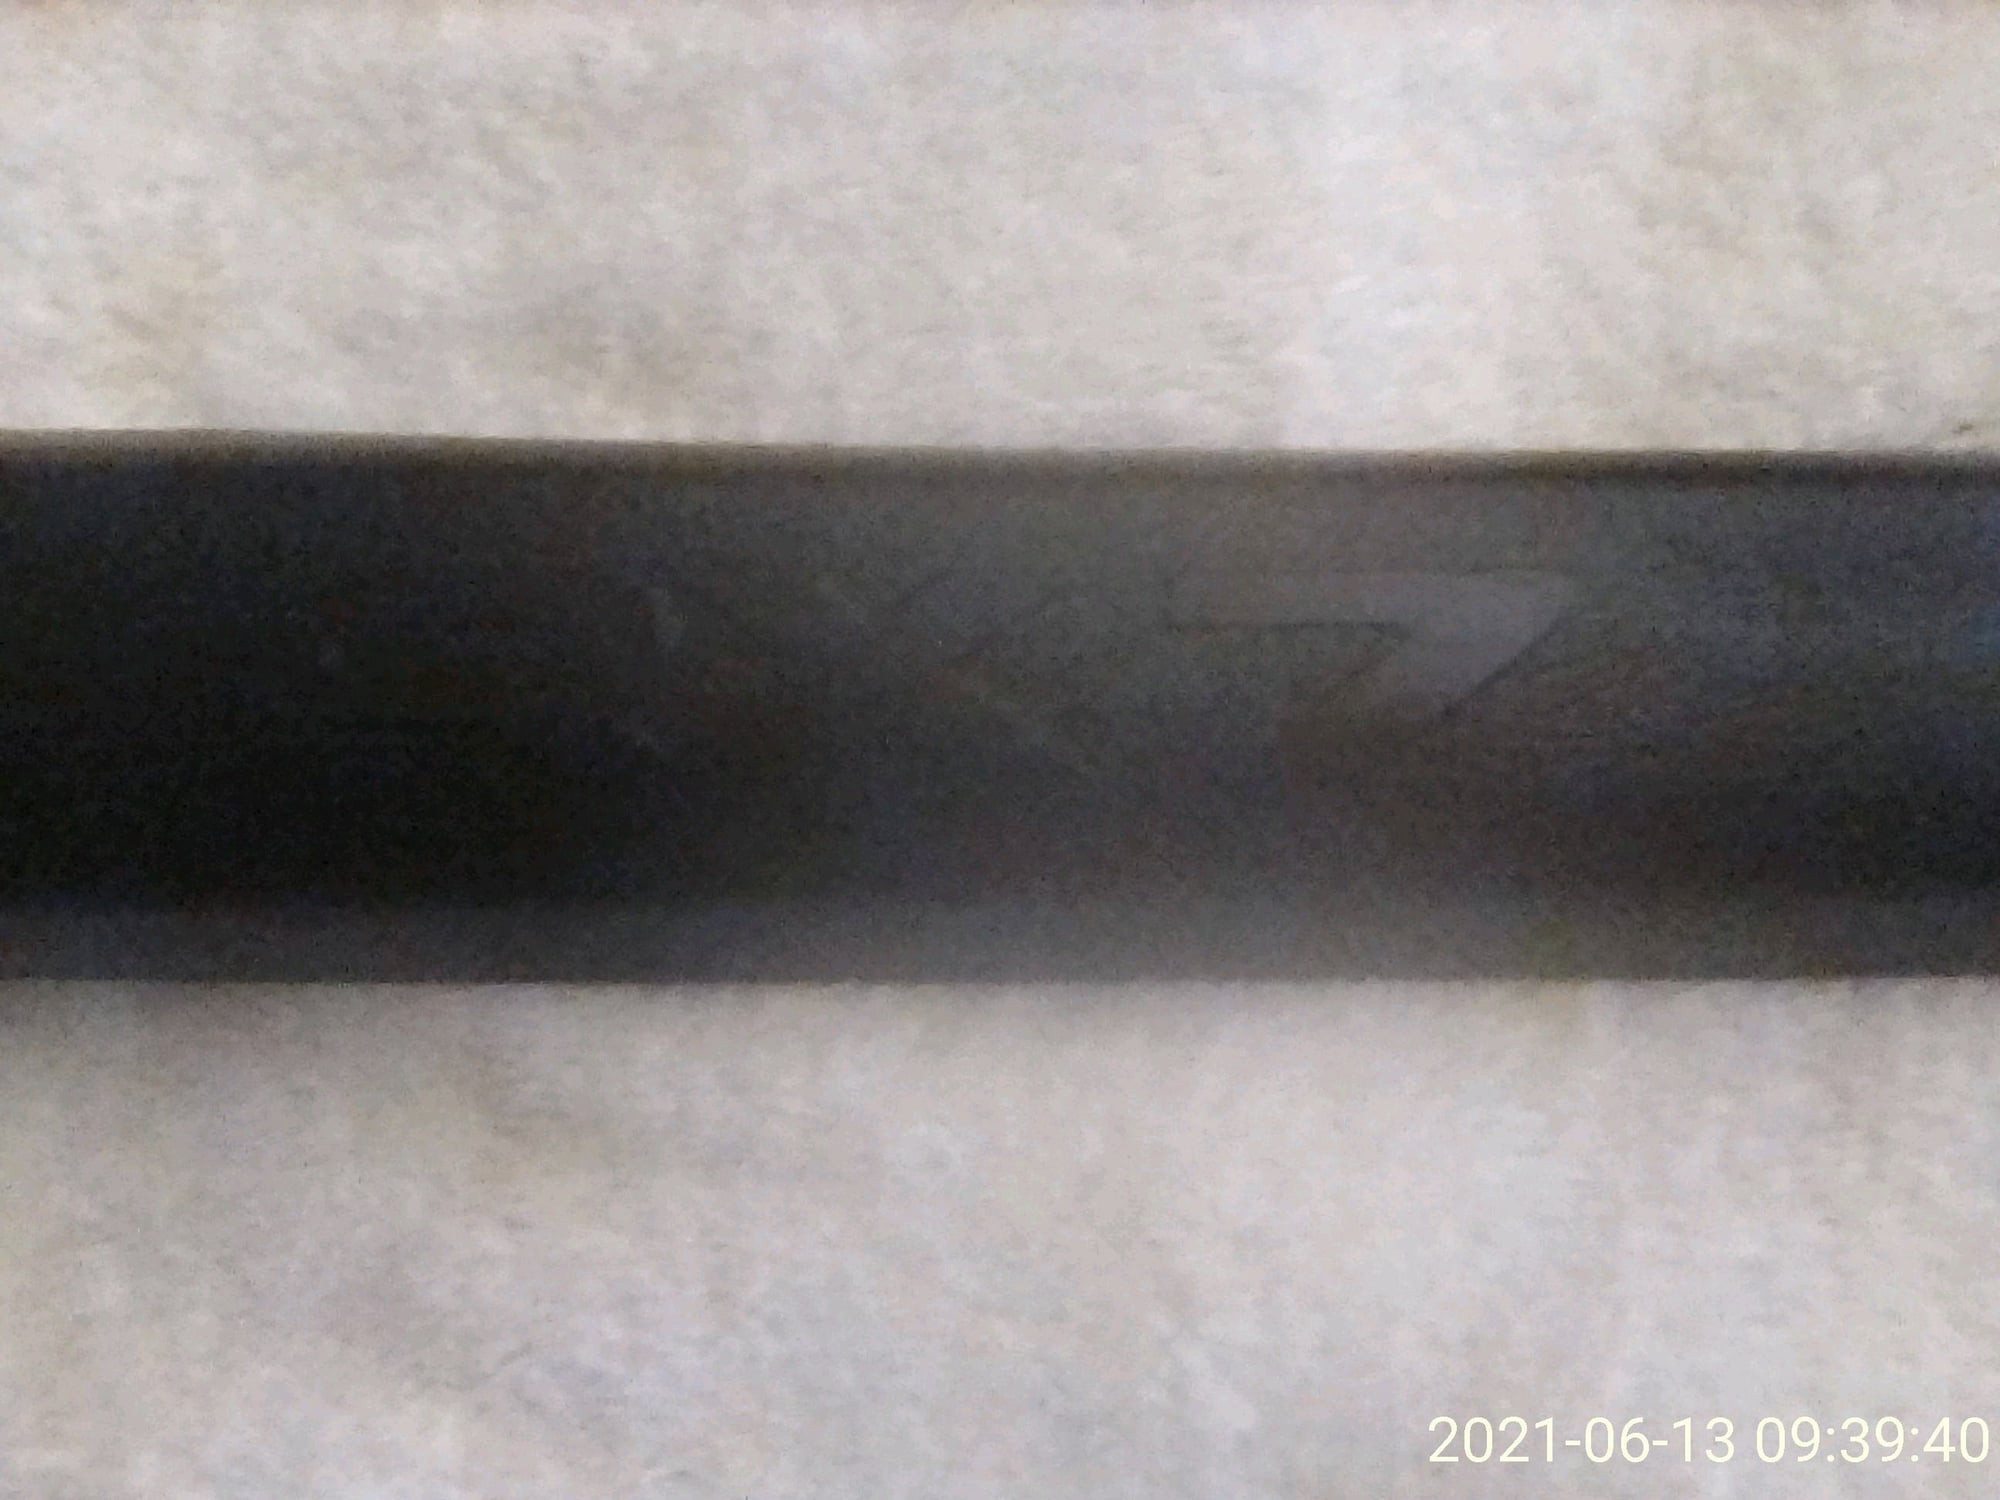 Interior/Upholstery - FD OEM Driver Side Door Sill - Used - 1993 to 1995 Mazda RX-7 - San Jose, CA 95121, United States